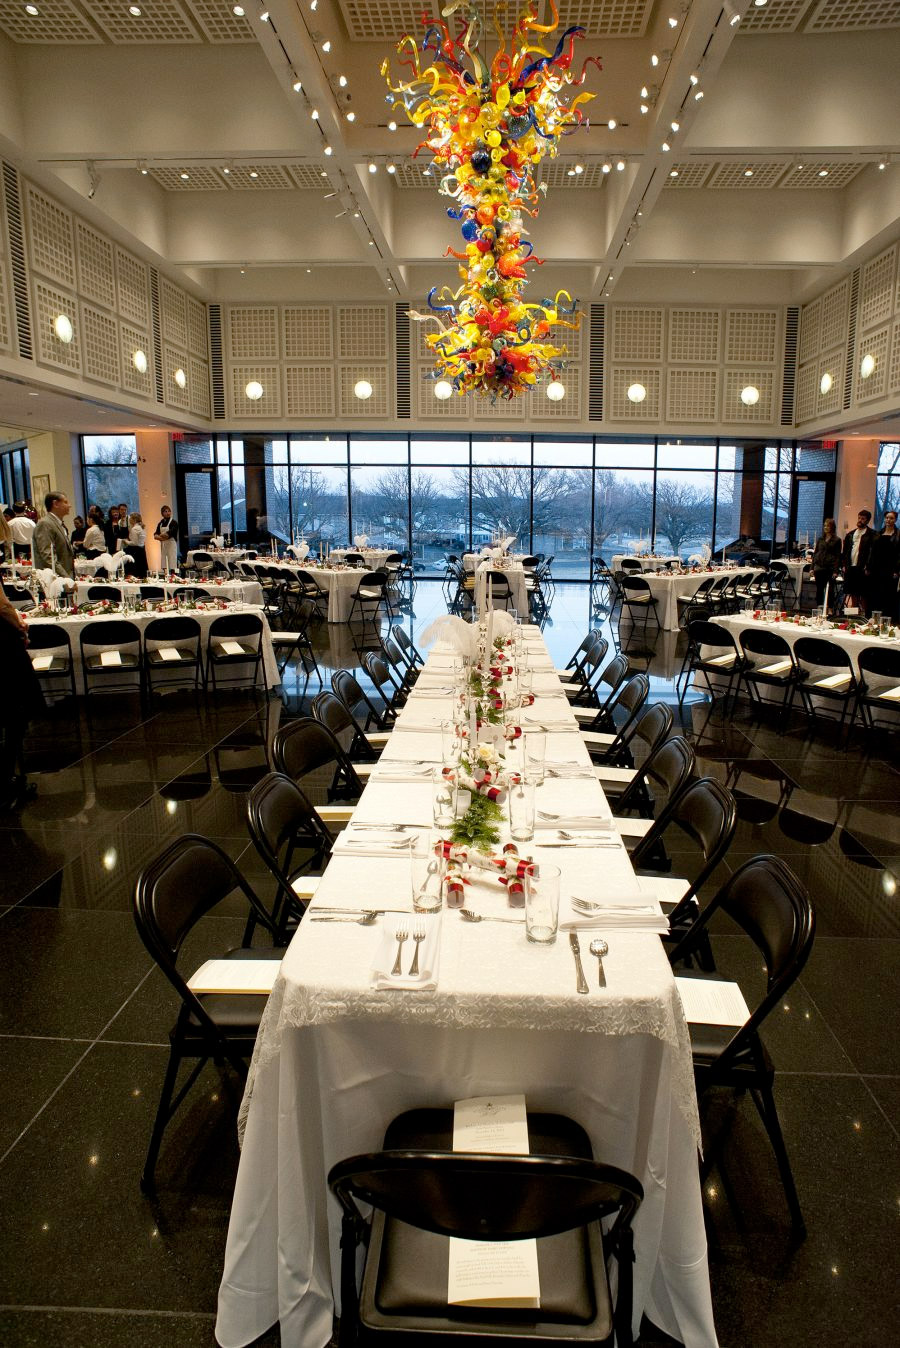 Wichita Art Museum set up for an event. There are long formal tables set for dinner service.